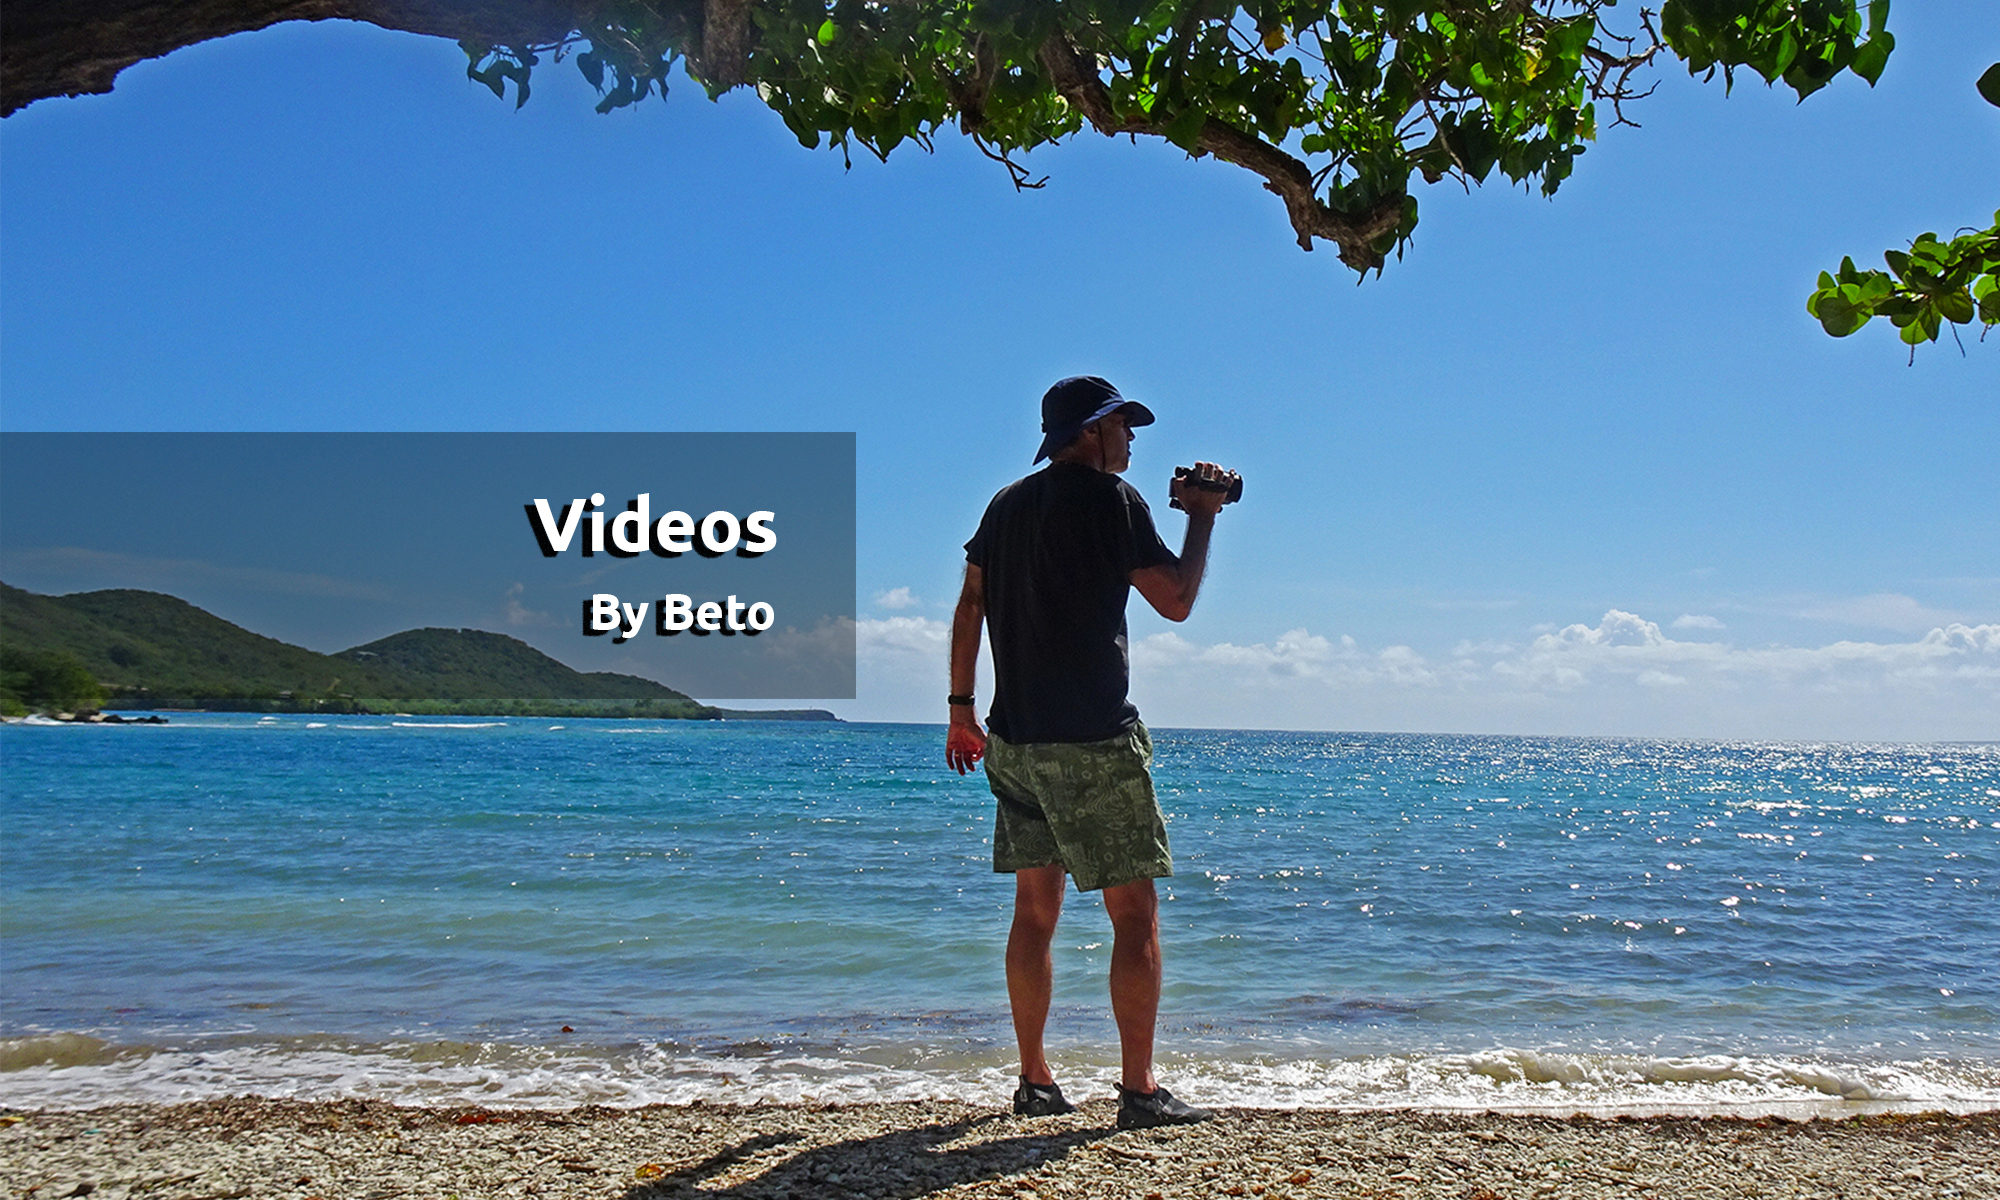 Beto-Video-title page